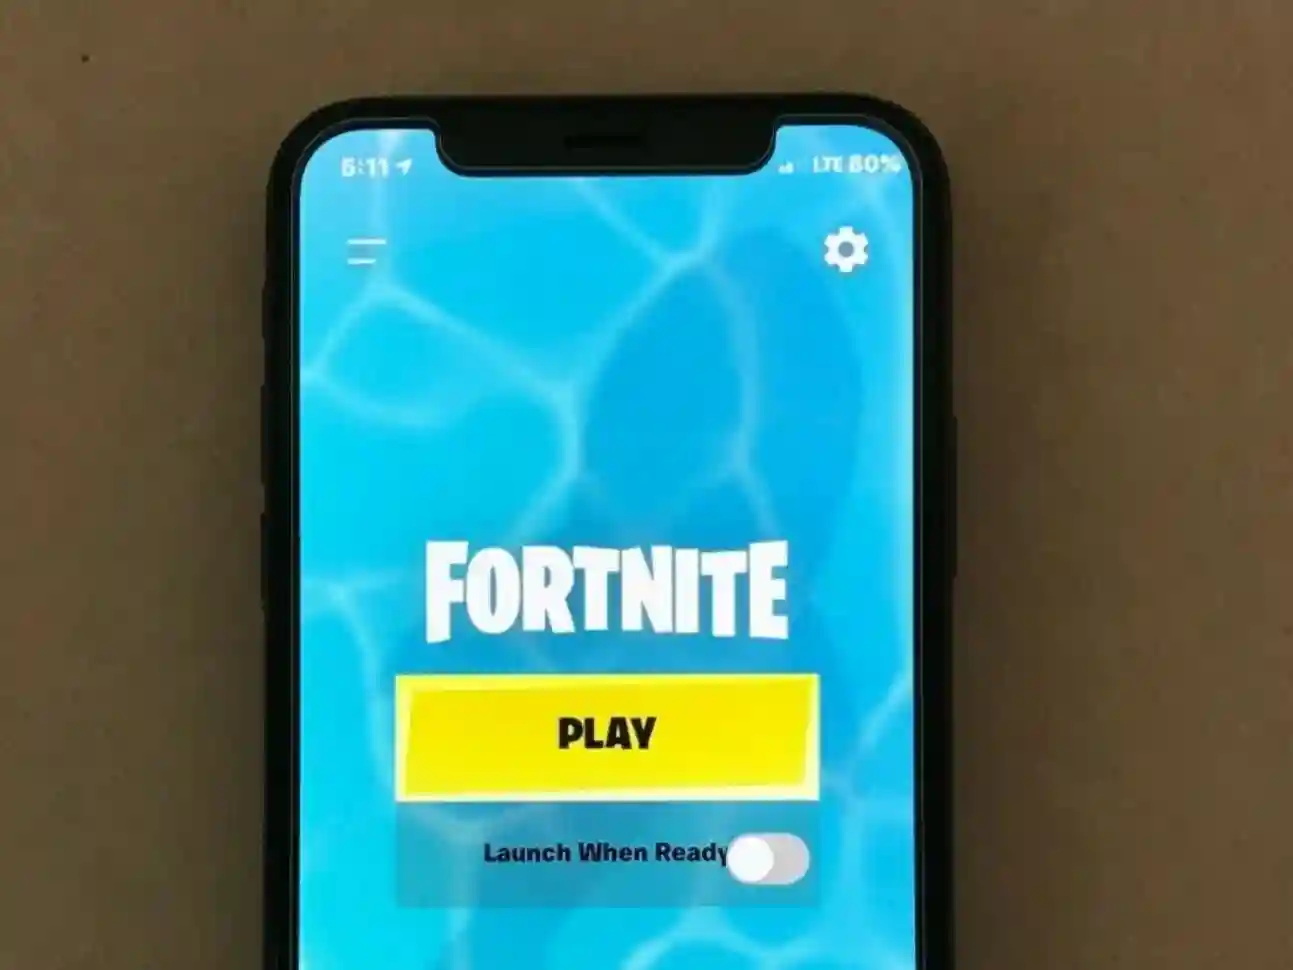 iPhones With Fortnite Installed On Sale For Thousand Of Dollars